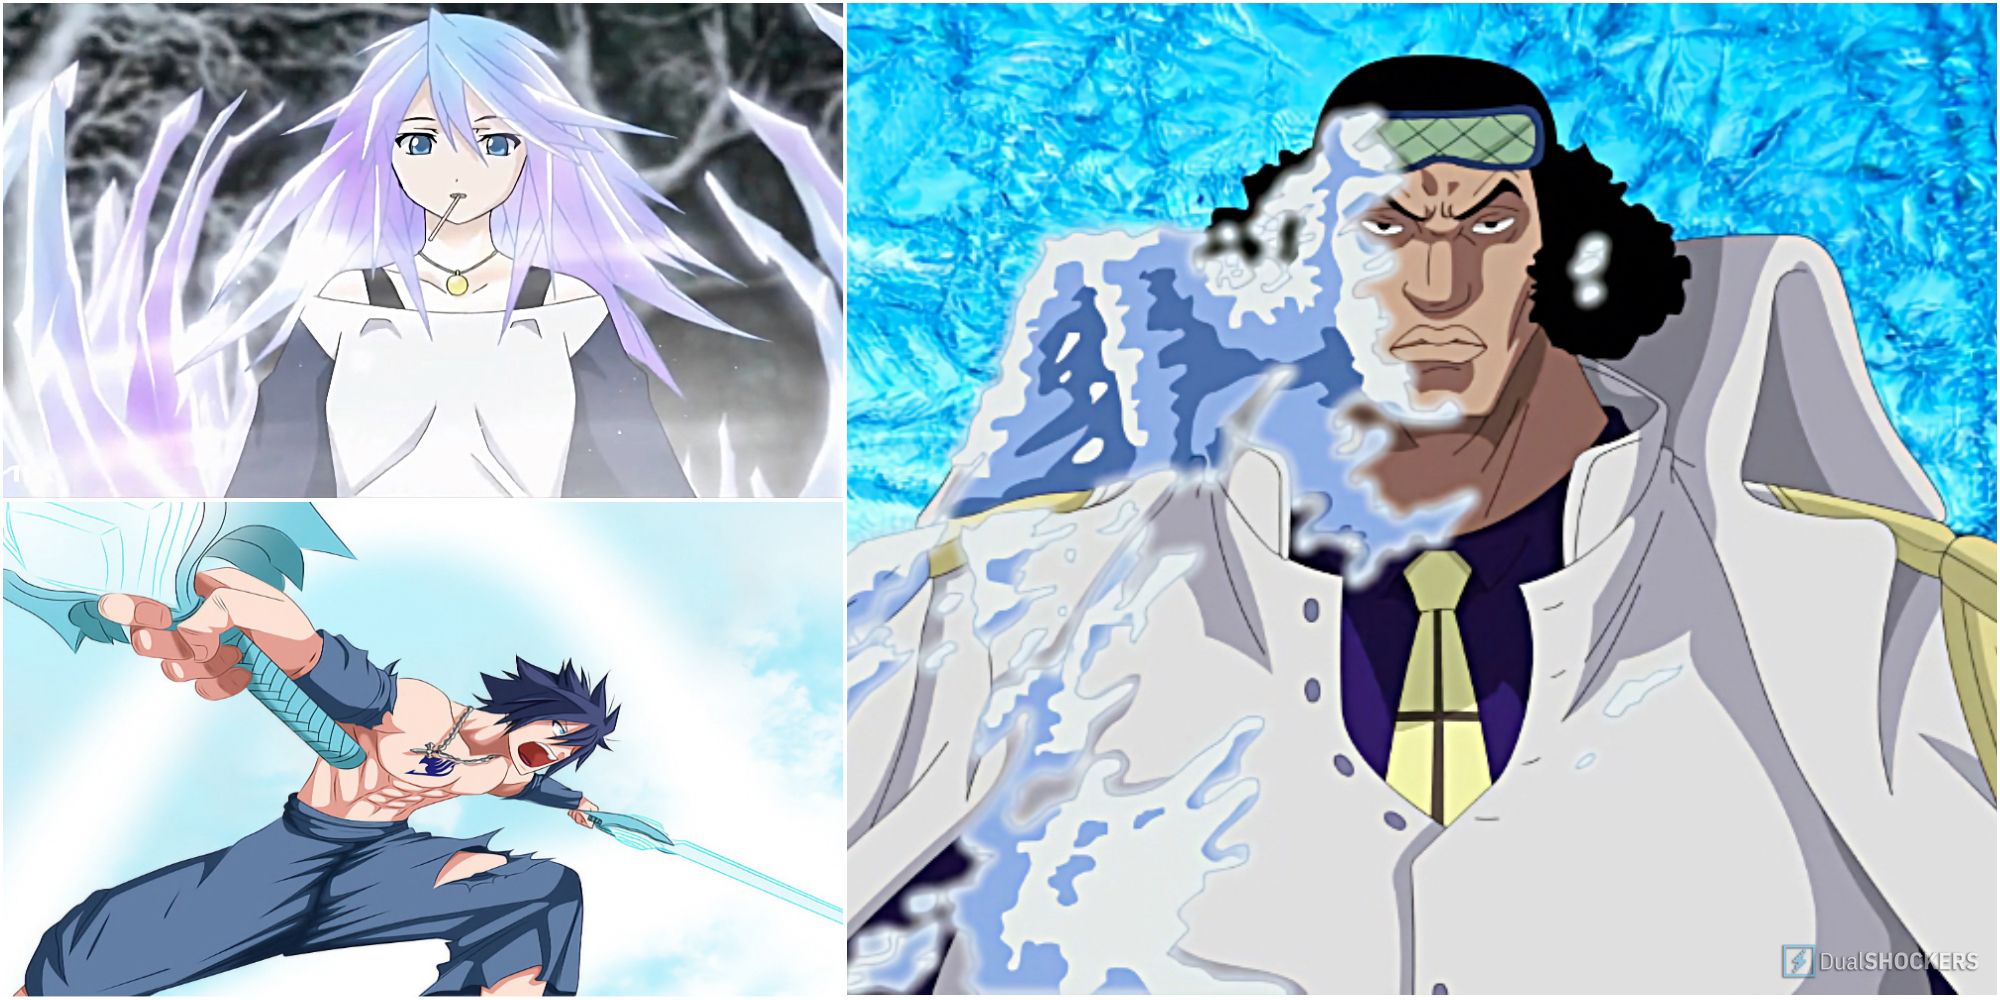 40 Anime Characters With Ice Magic Abilities (Recommended)